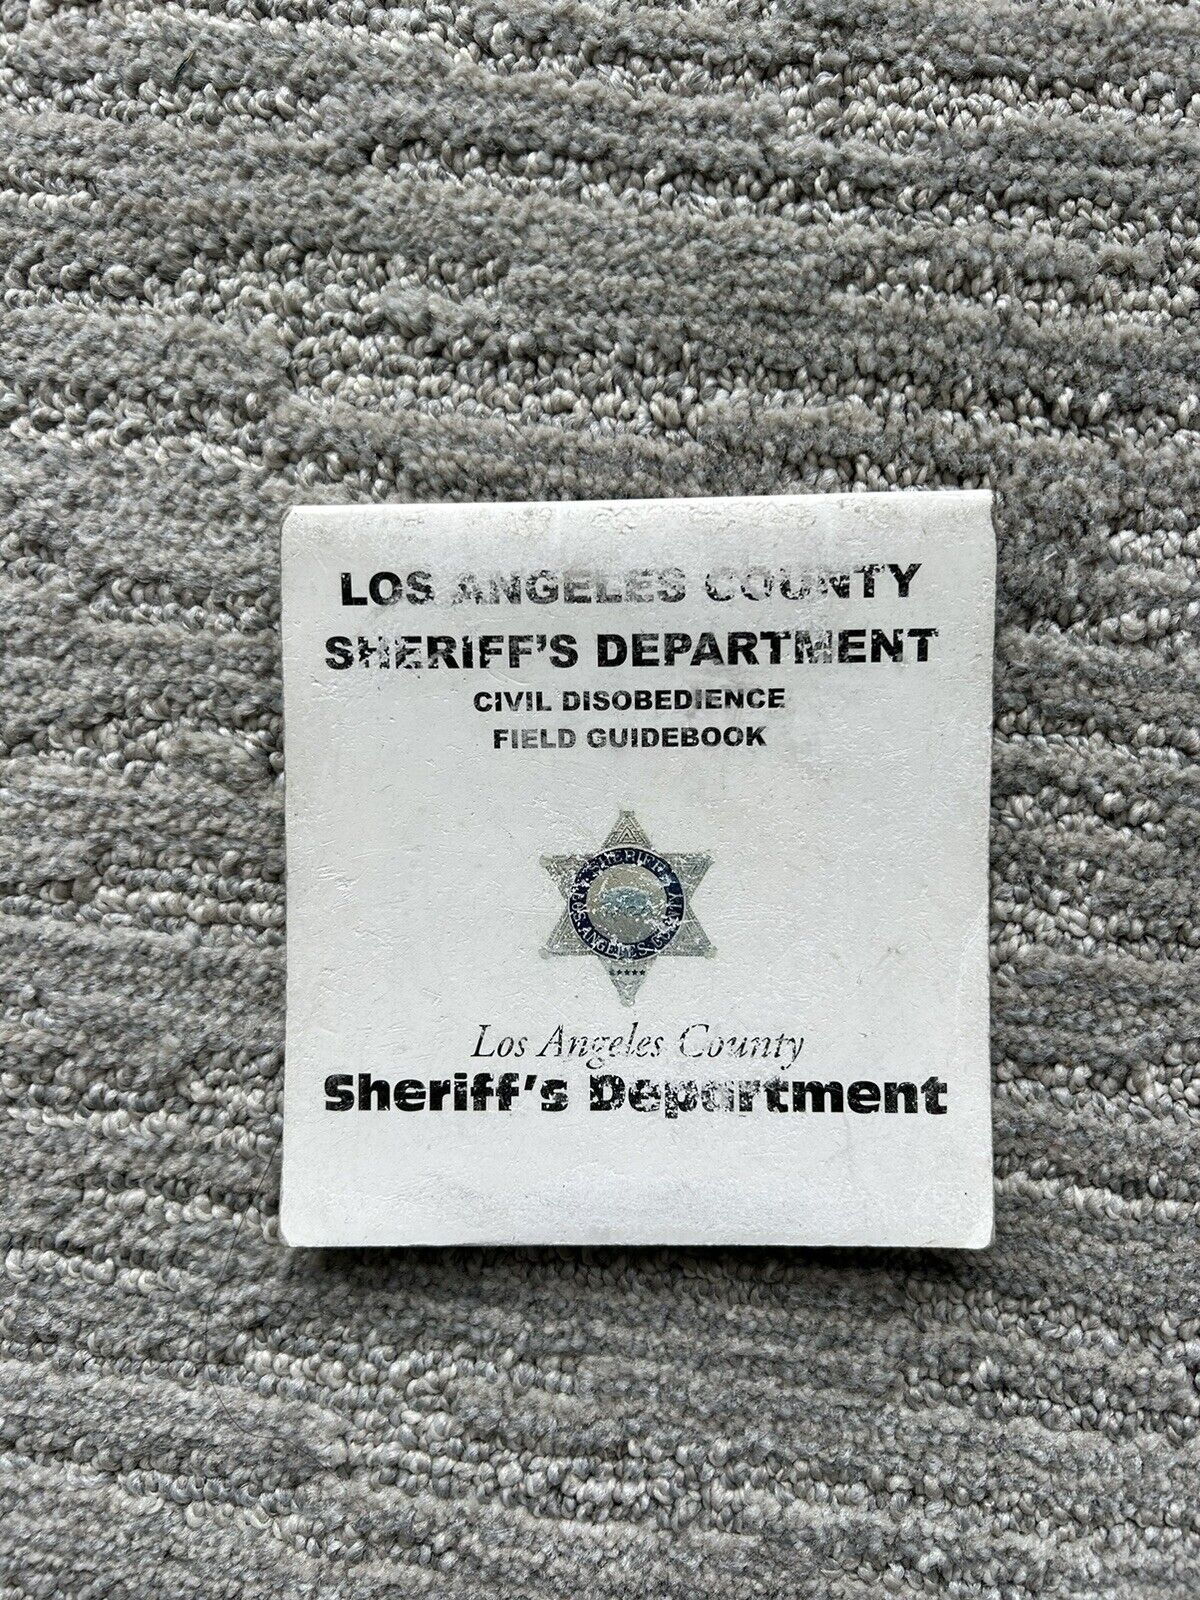 LOS ANGELES COUNTY SHERIFF'S DEPT. CIVIL DISOBEDIENCE GUIDEBOOK.  VINTAGE